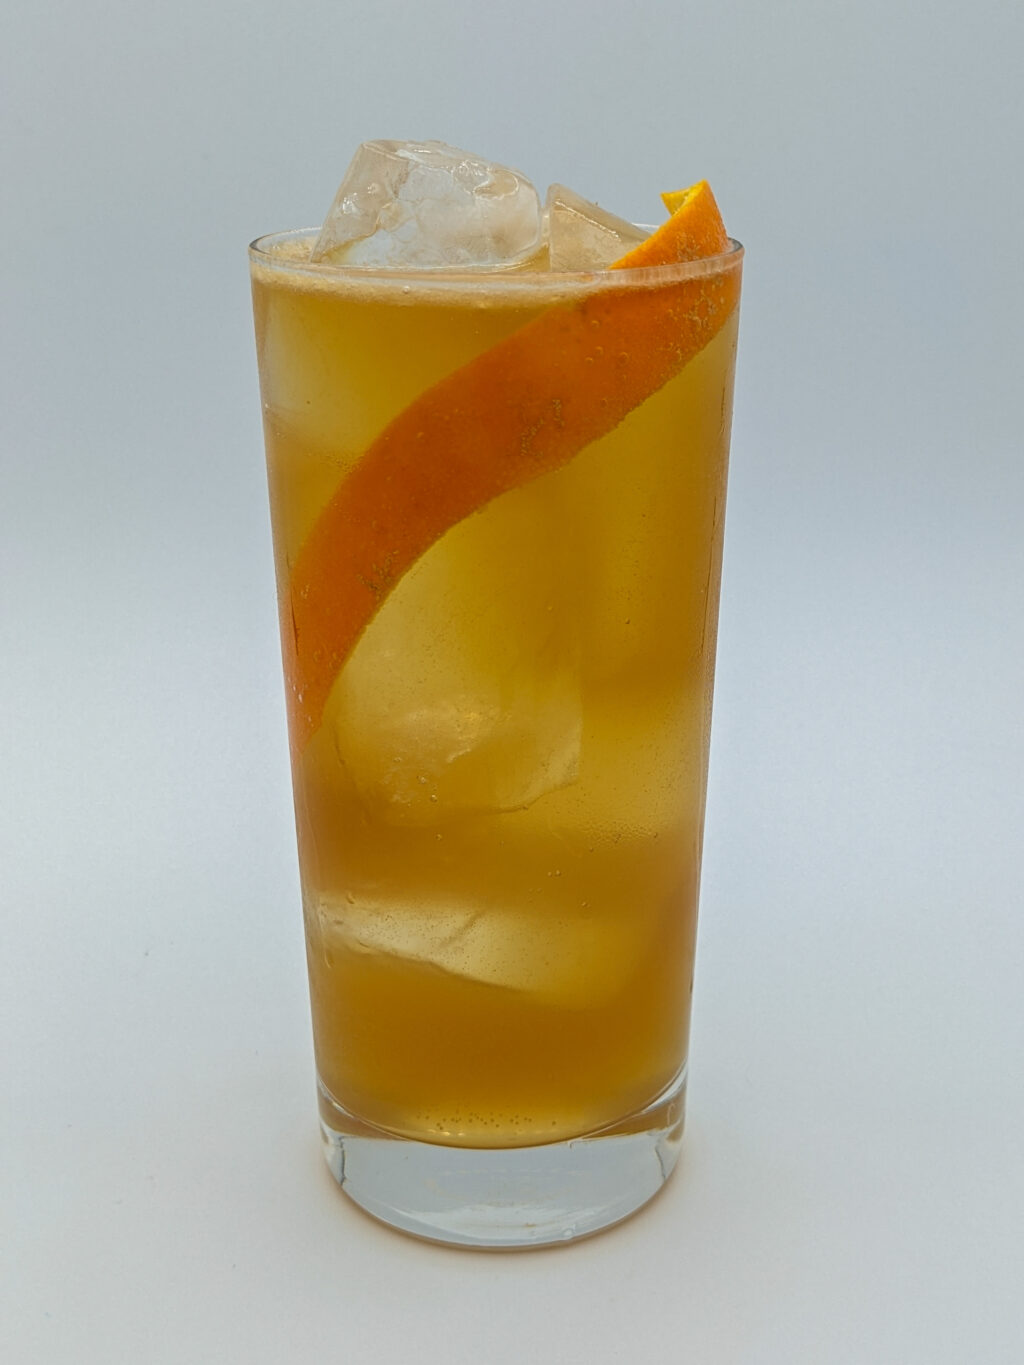 golden liquid in a highball glass filled with ice with a long orange peel garnish